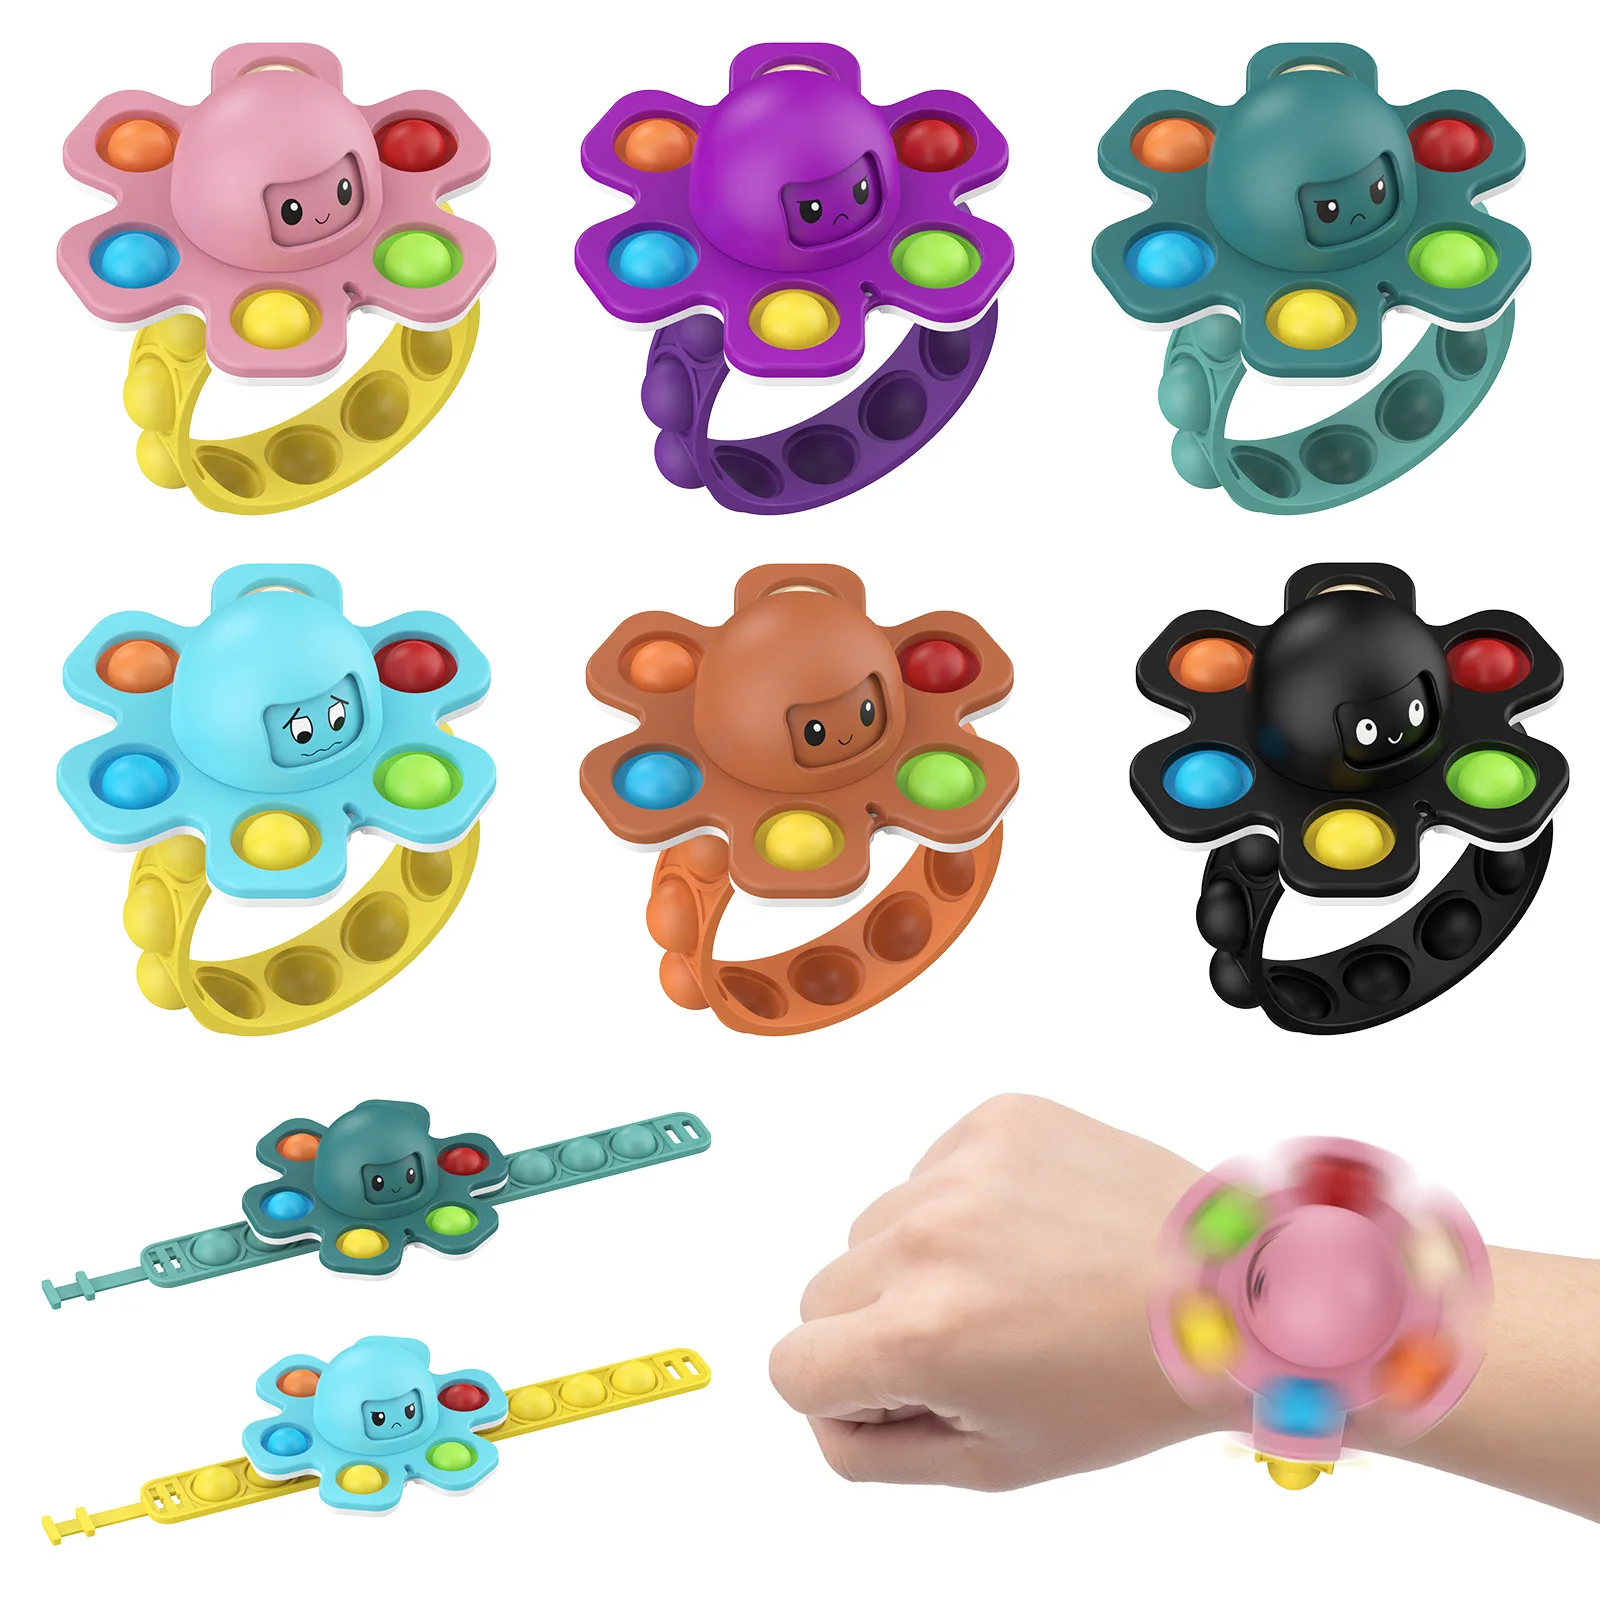 

Antistress Octopus Fidget Spinner Gyro Decompression Bracelet Simple Dimple Stress Relief Squishy Push Bubble Toys for Kids Gift